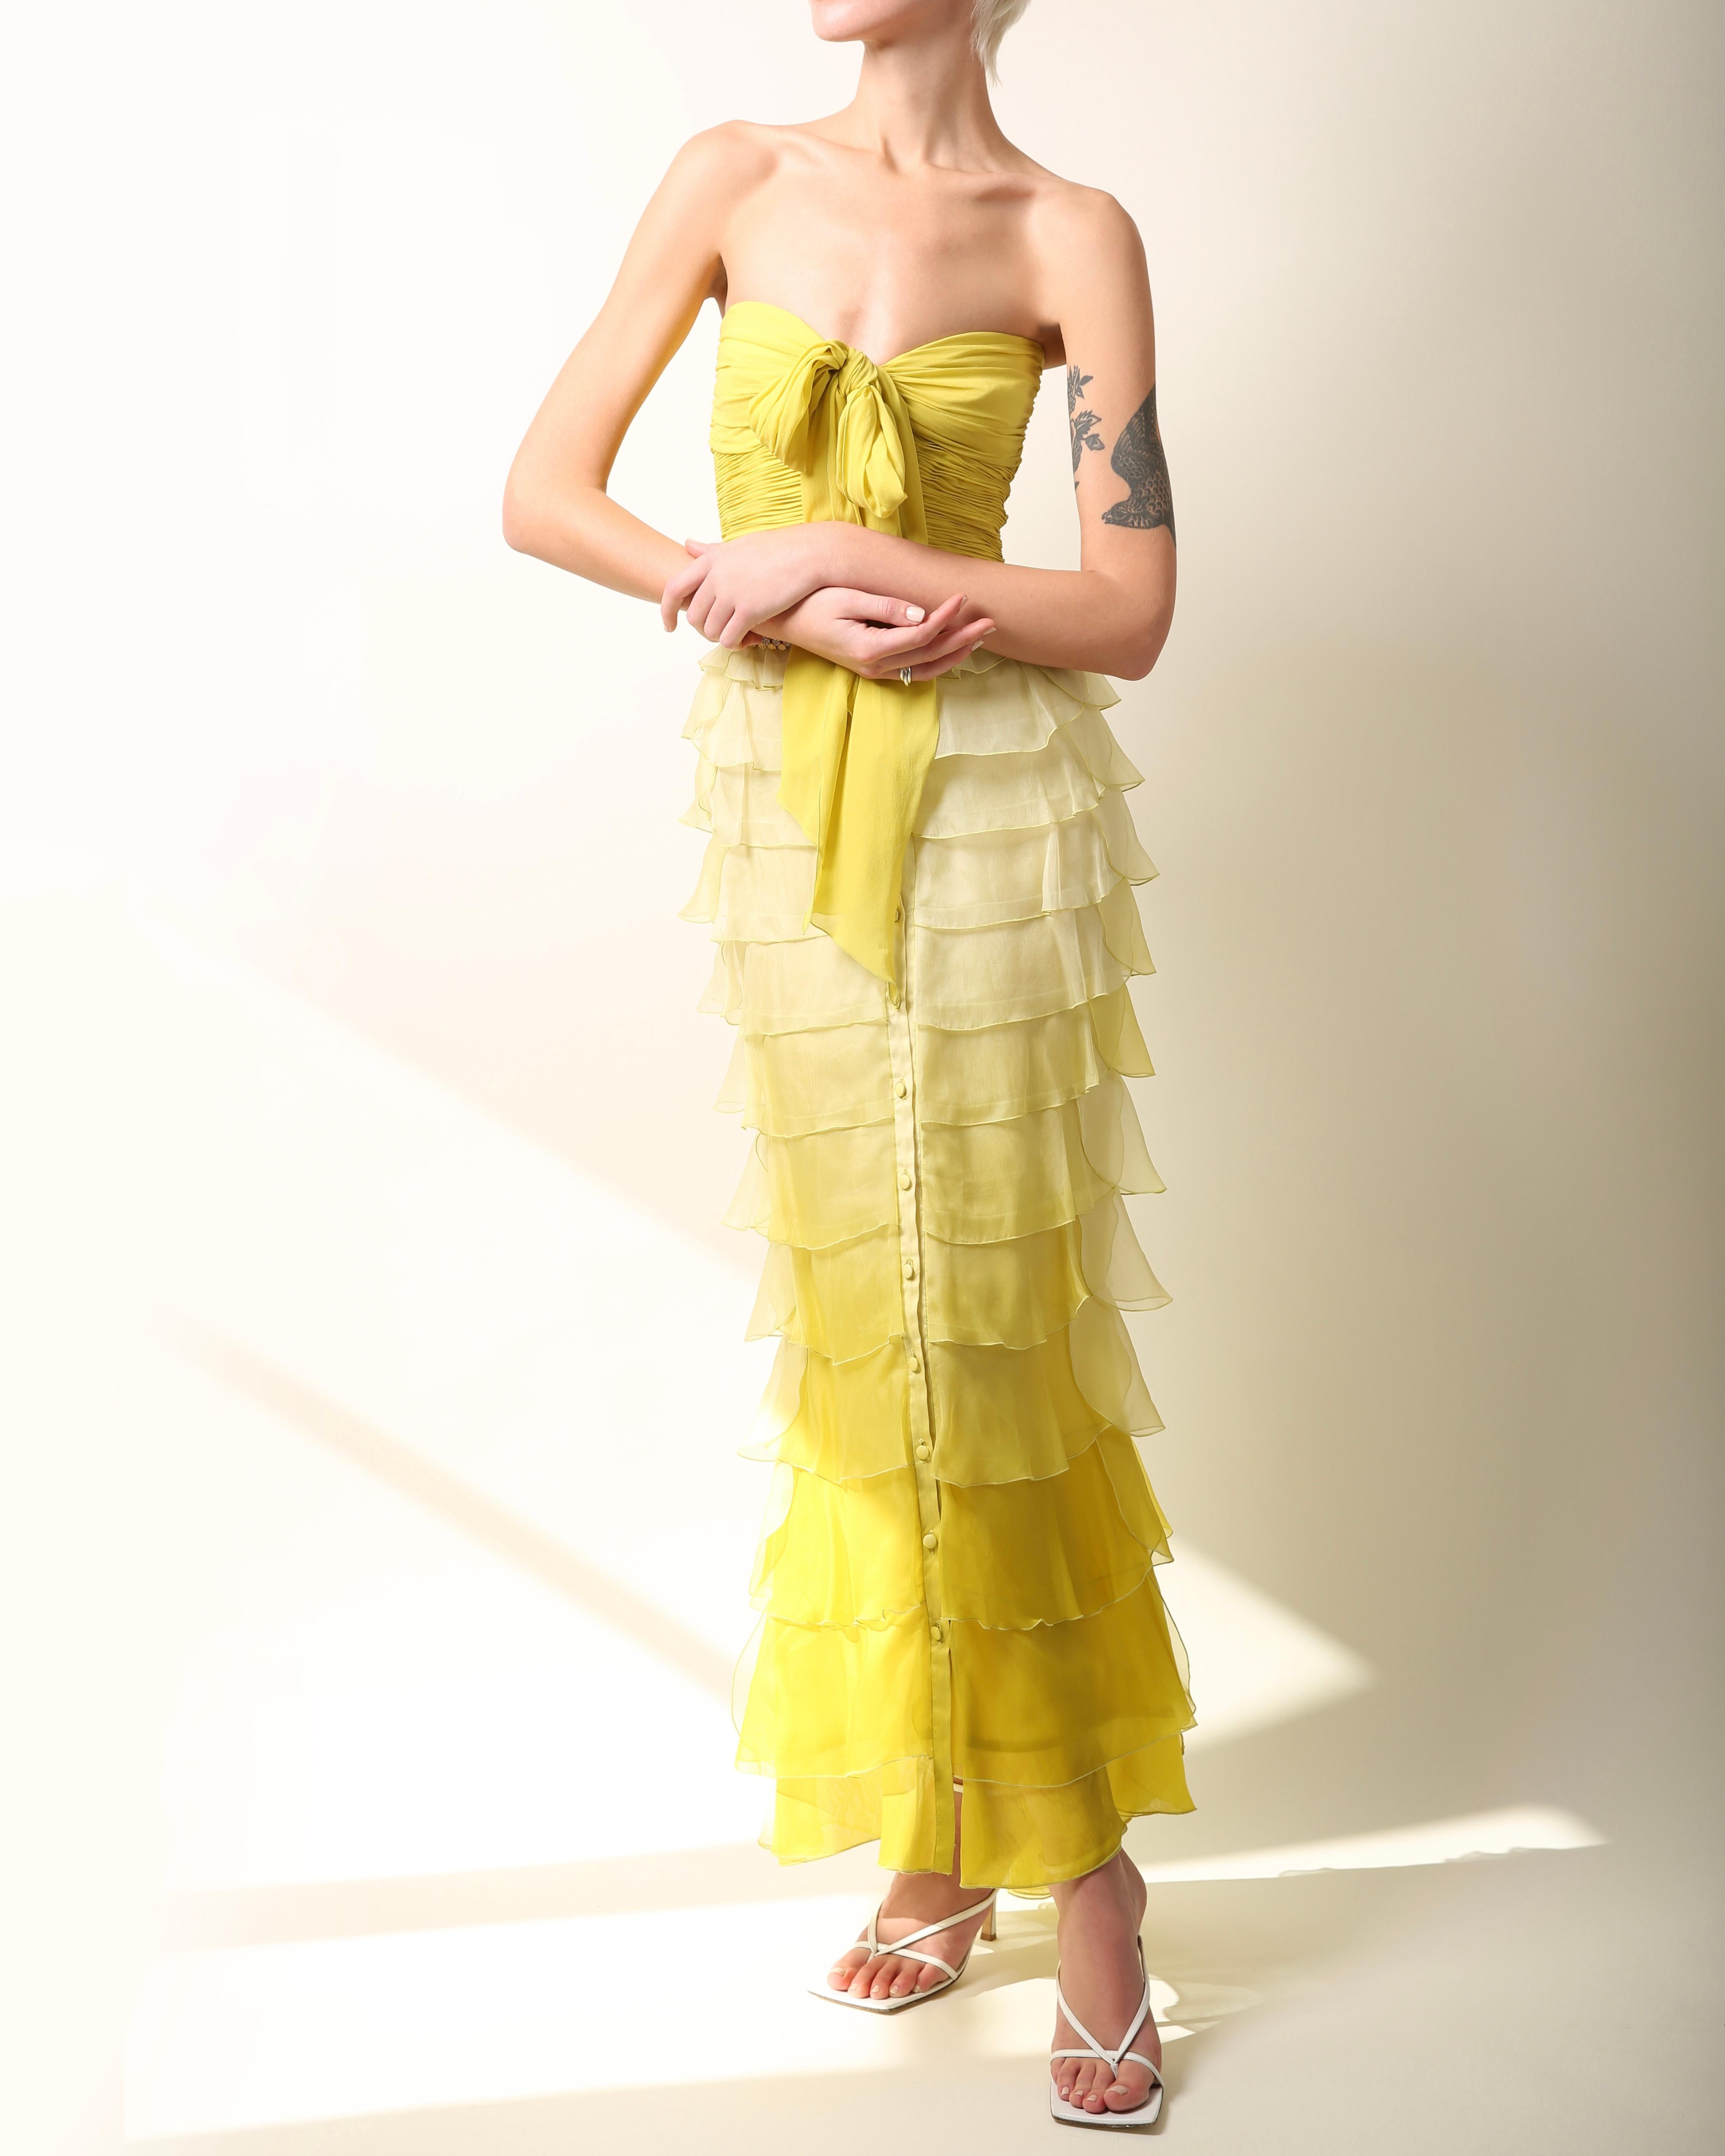 Valentino Spring Summer 2005
Full length strapless gown in chartreuse 
Boned corset upper
Tiered ruffles in sheer ombré silk
Long silk ties at the bust
The dress closes via buttons that run the full length of the dress 
Concealed hooks add extra